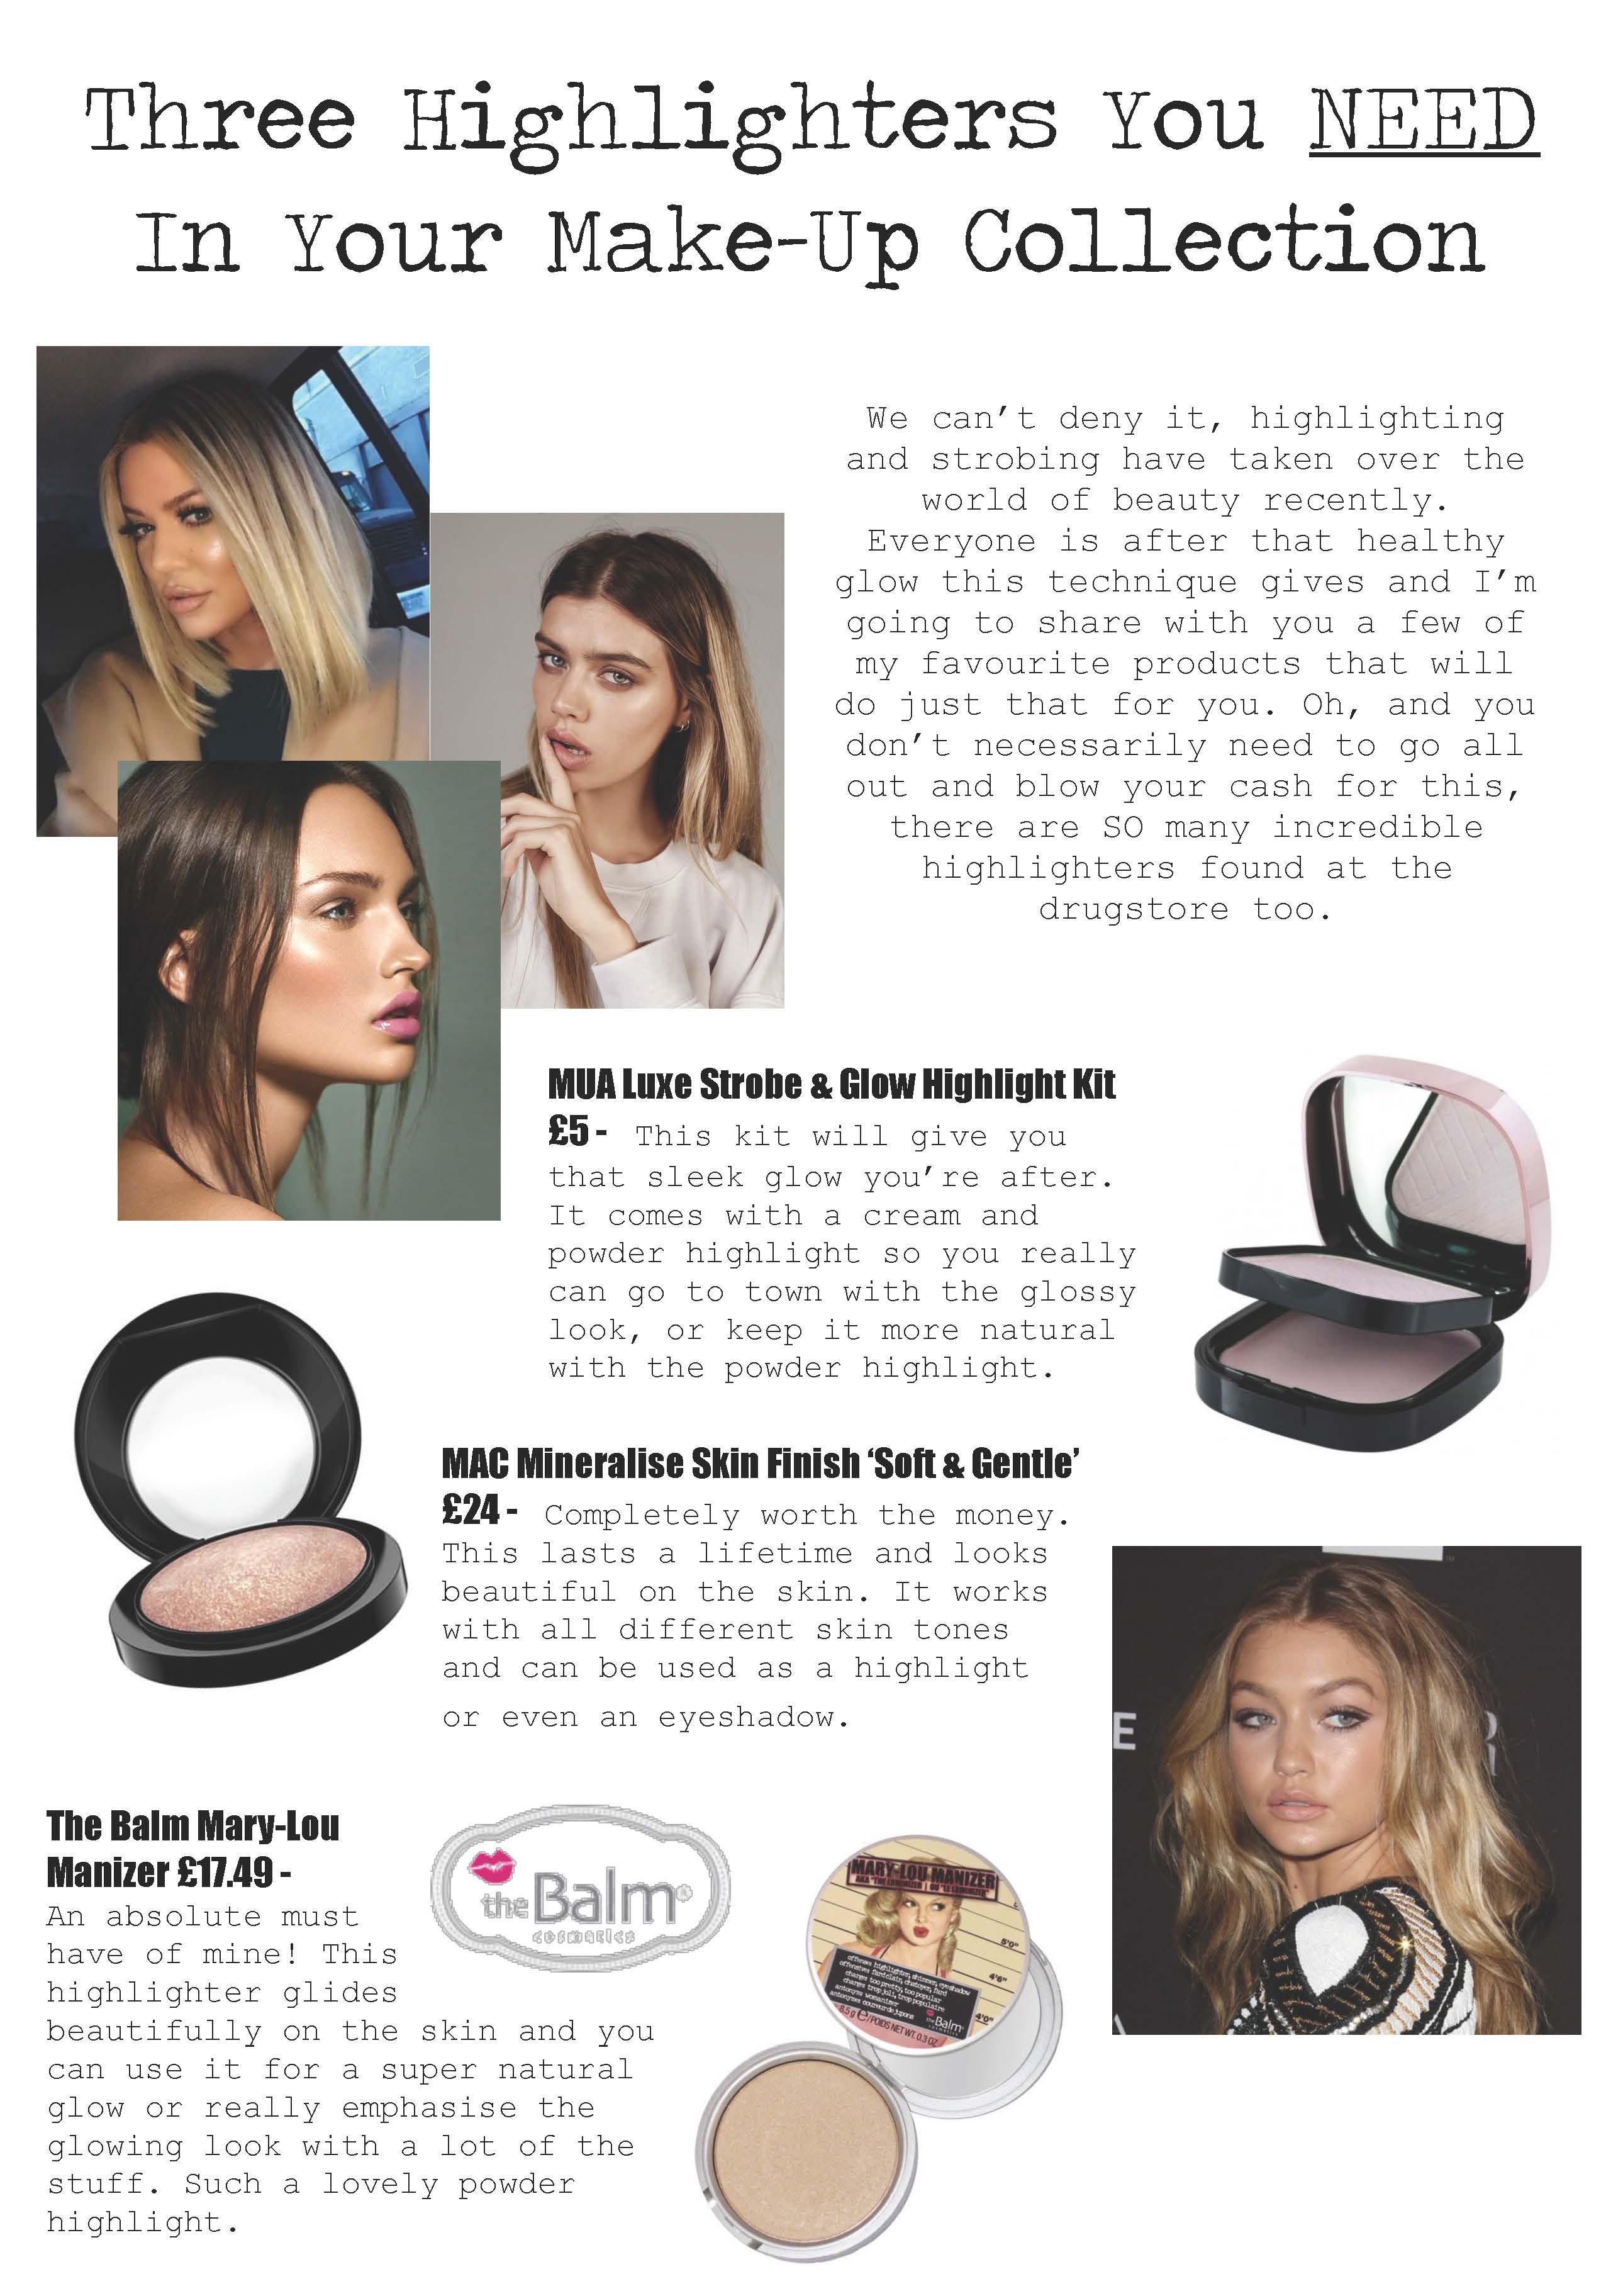 Three Highlighters You Need In Your Make-Up Collection_Page_1